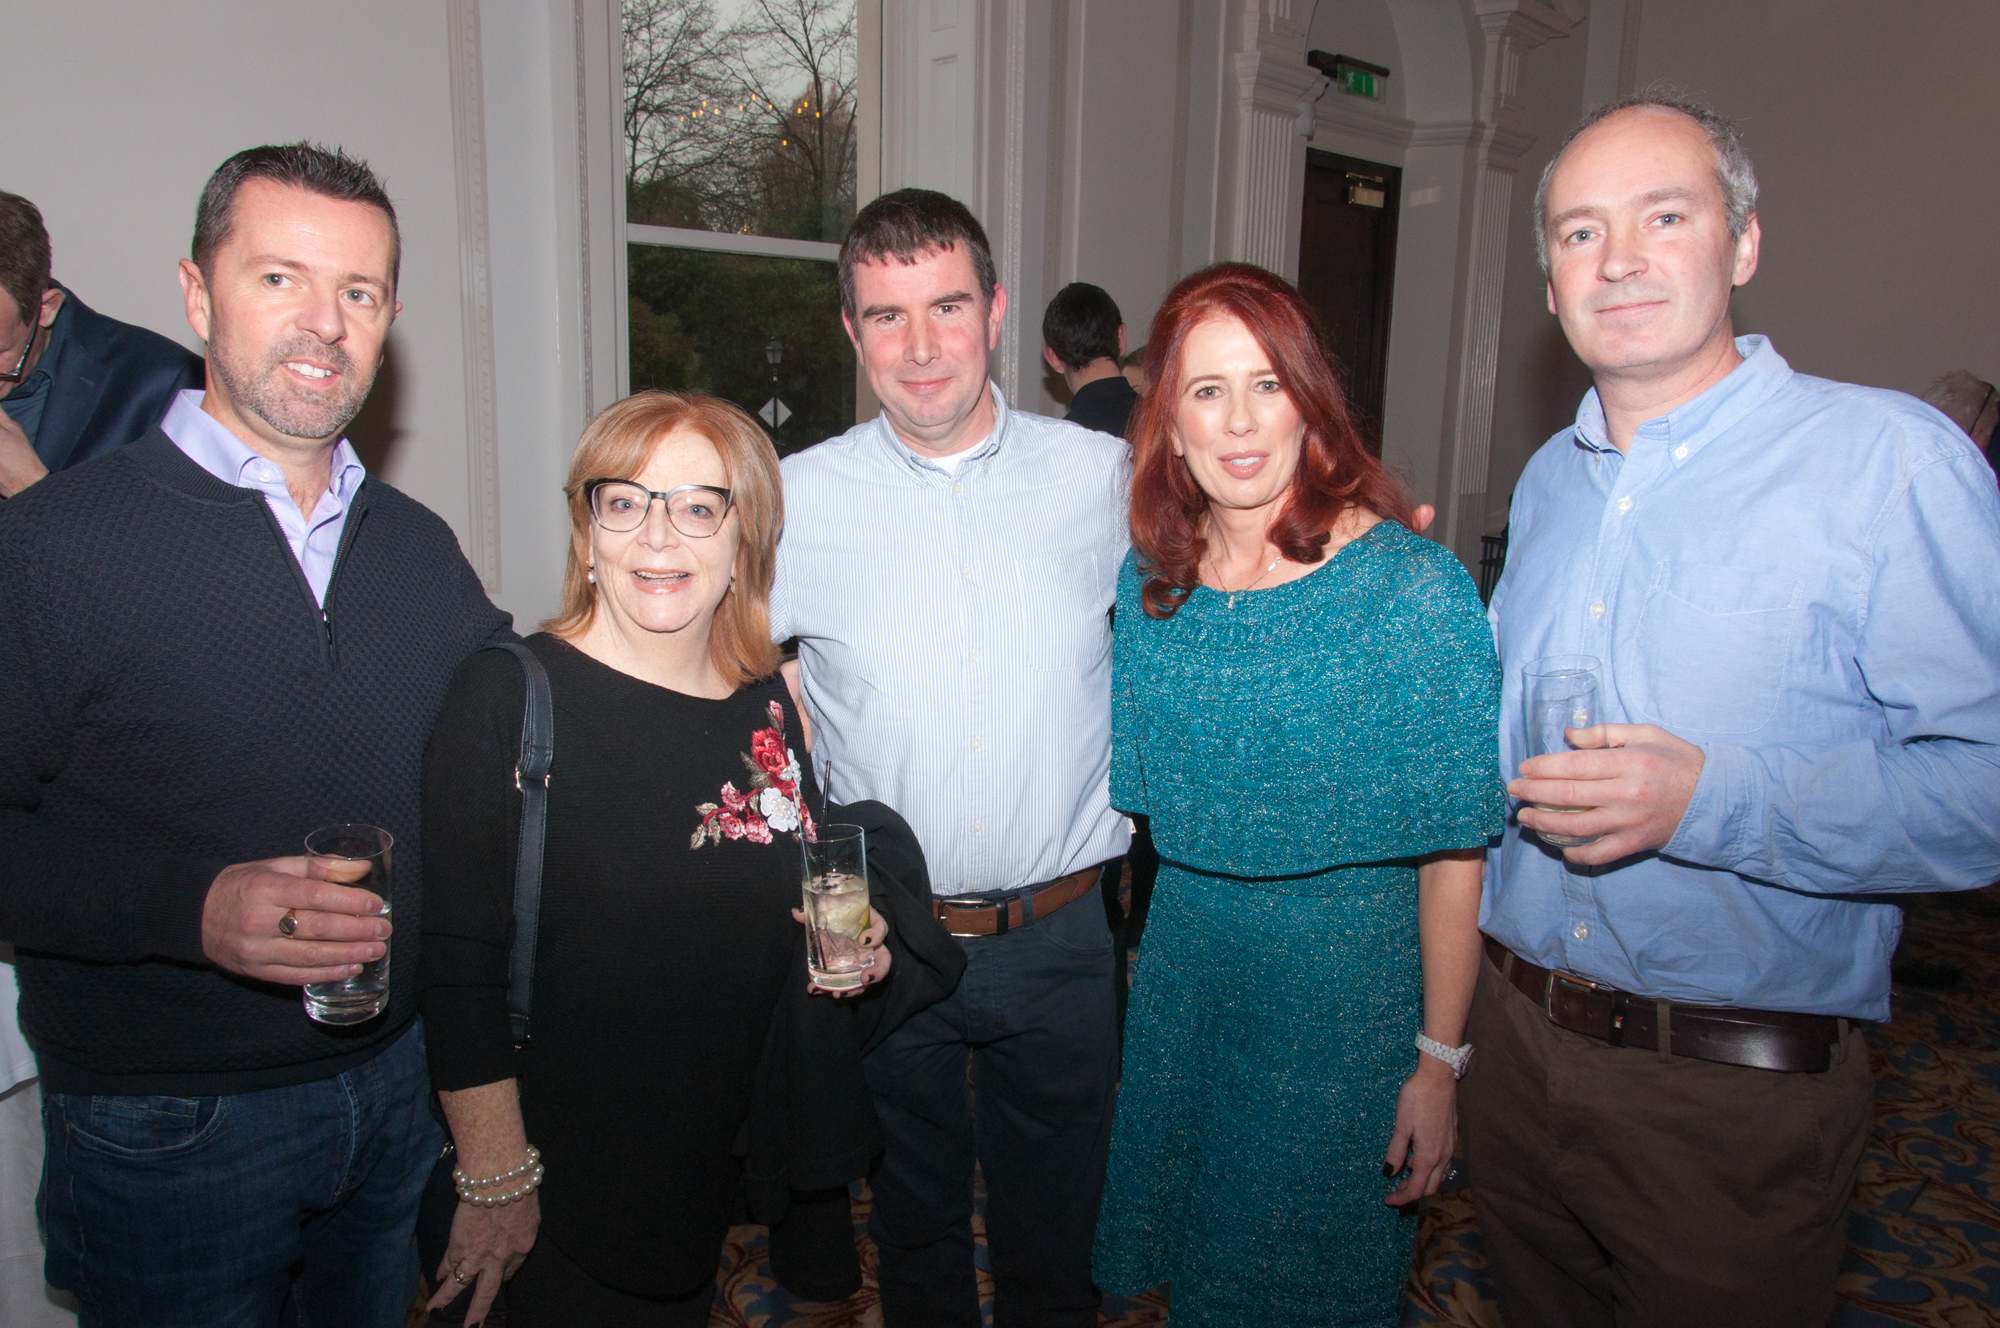 St Gerard's School Past Pupils Union Lunch at Shelbourne Hotel by Natalia Marzec_ low res34